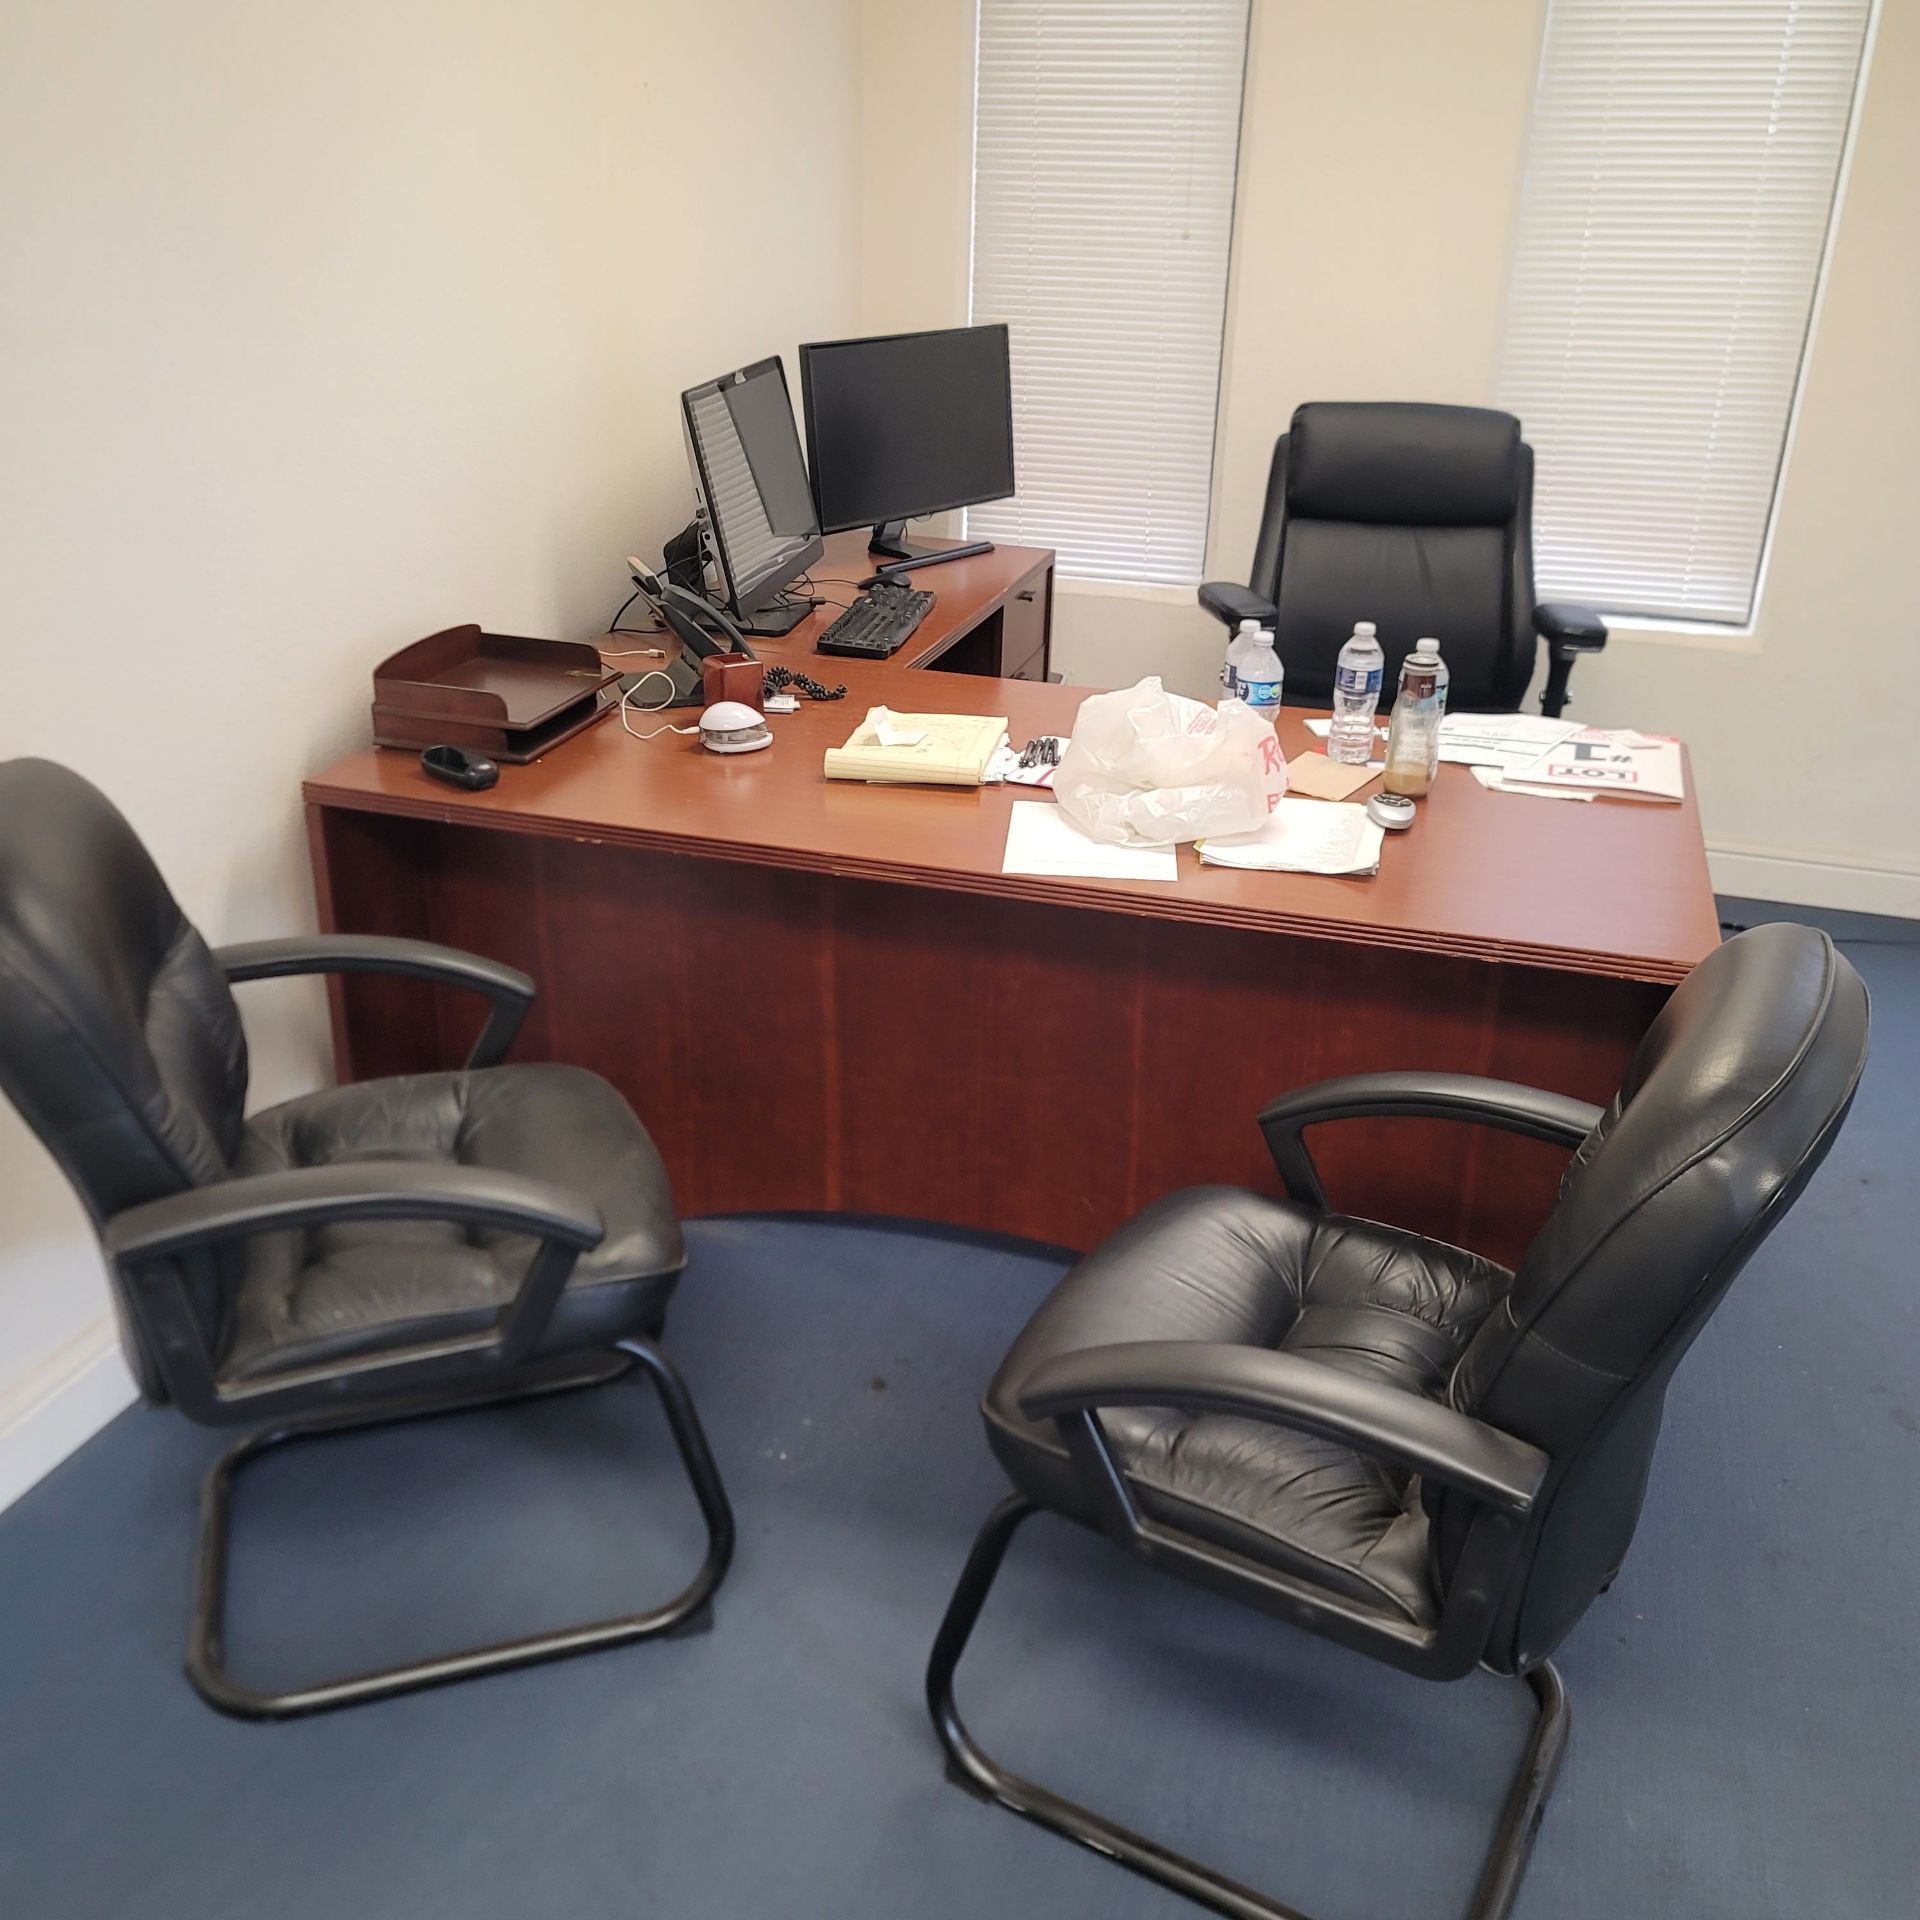 LOT - ALL OFFICE FURNITURE IN ROOM, ELECTRONICS ARE NOT INCLUDED